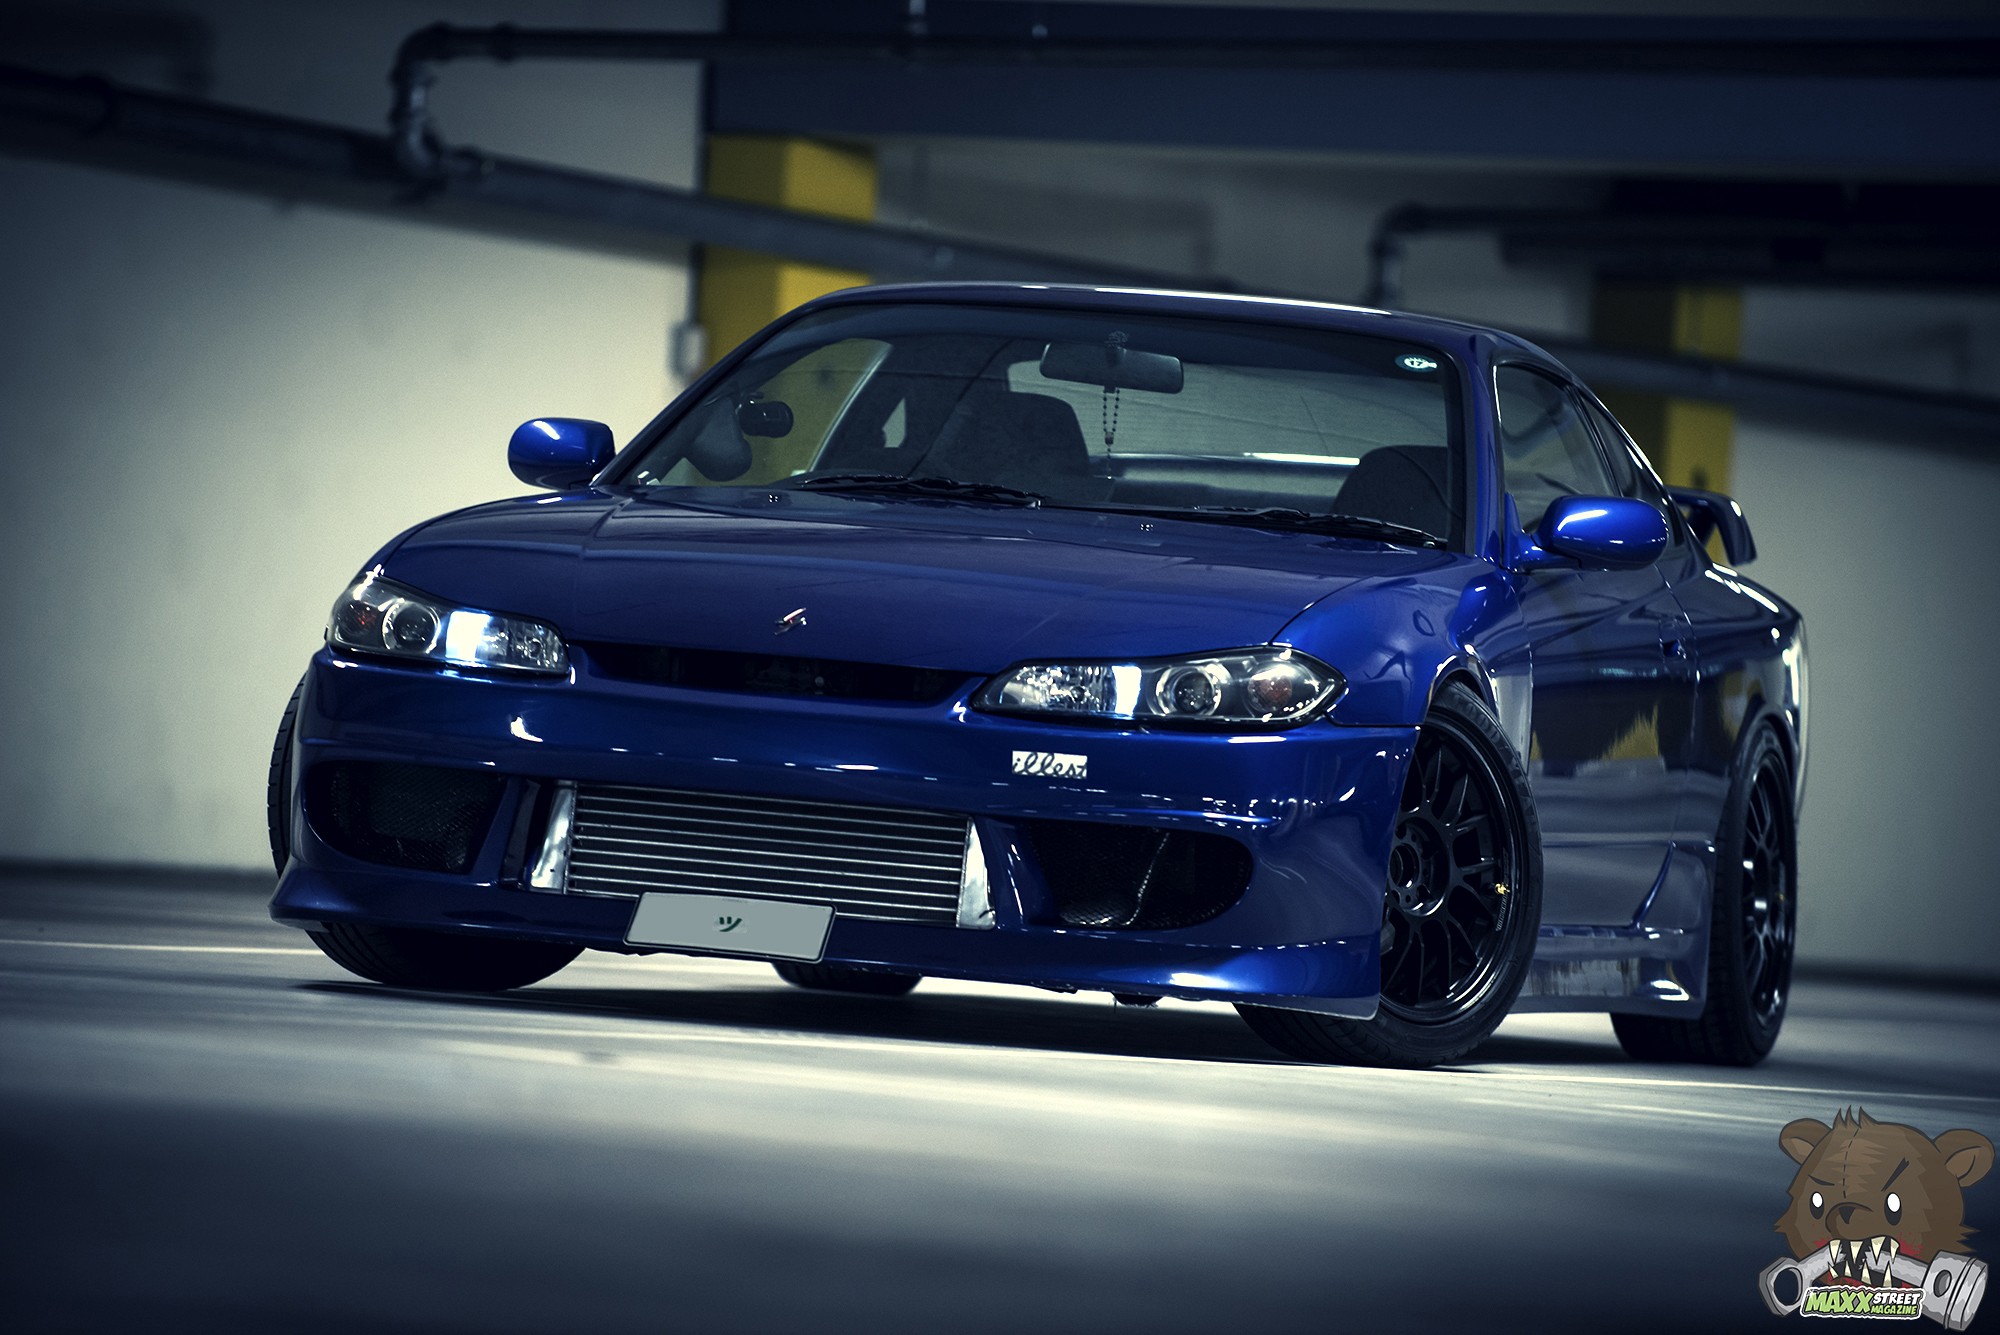 Nissan Nissan Silvia Spec R Jdm Japanese Cars Drift S15 Nissan Silvia S15 Silvia Wallpapers Hd Desktop And Mobile Backgrounds